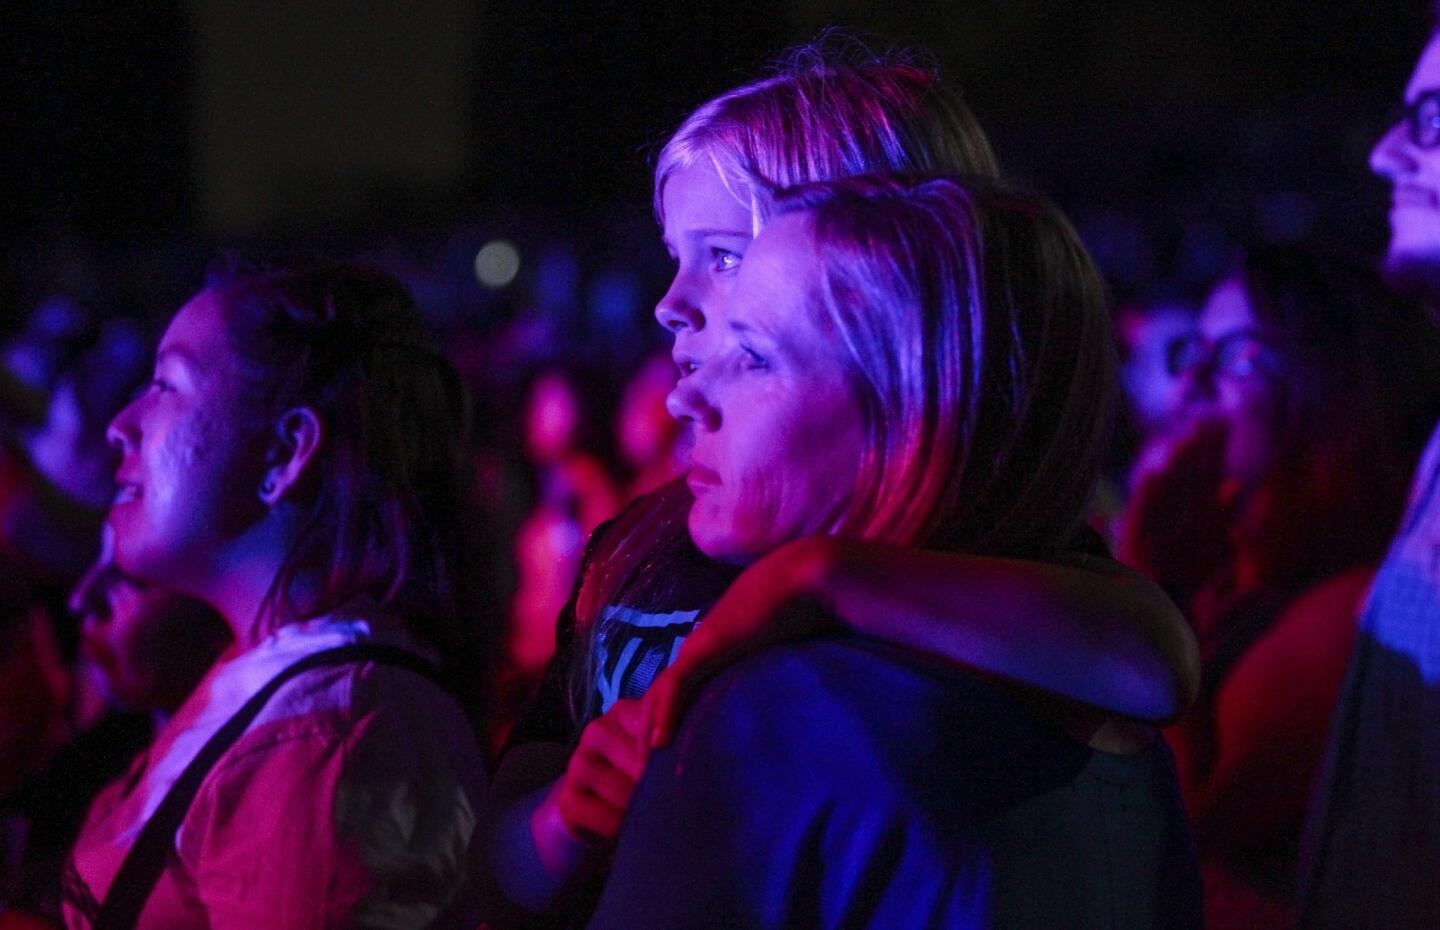 A woman holds a child as they watch Nick Jonas perform.